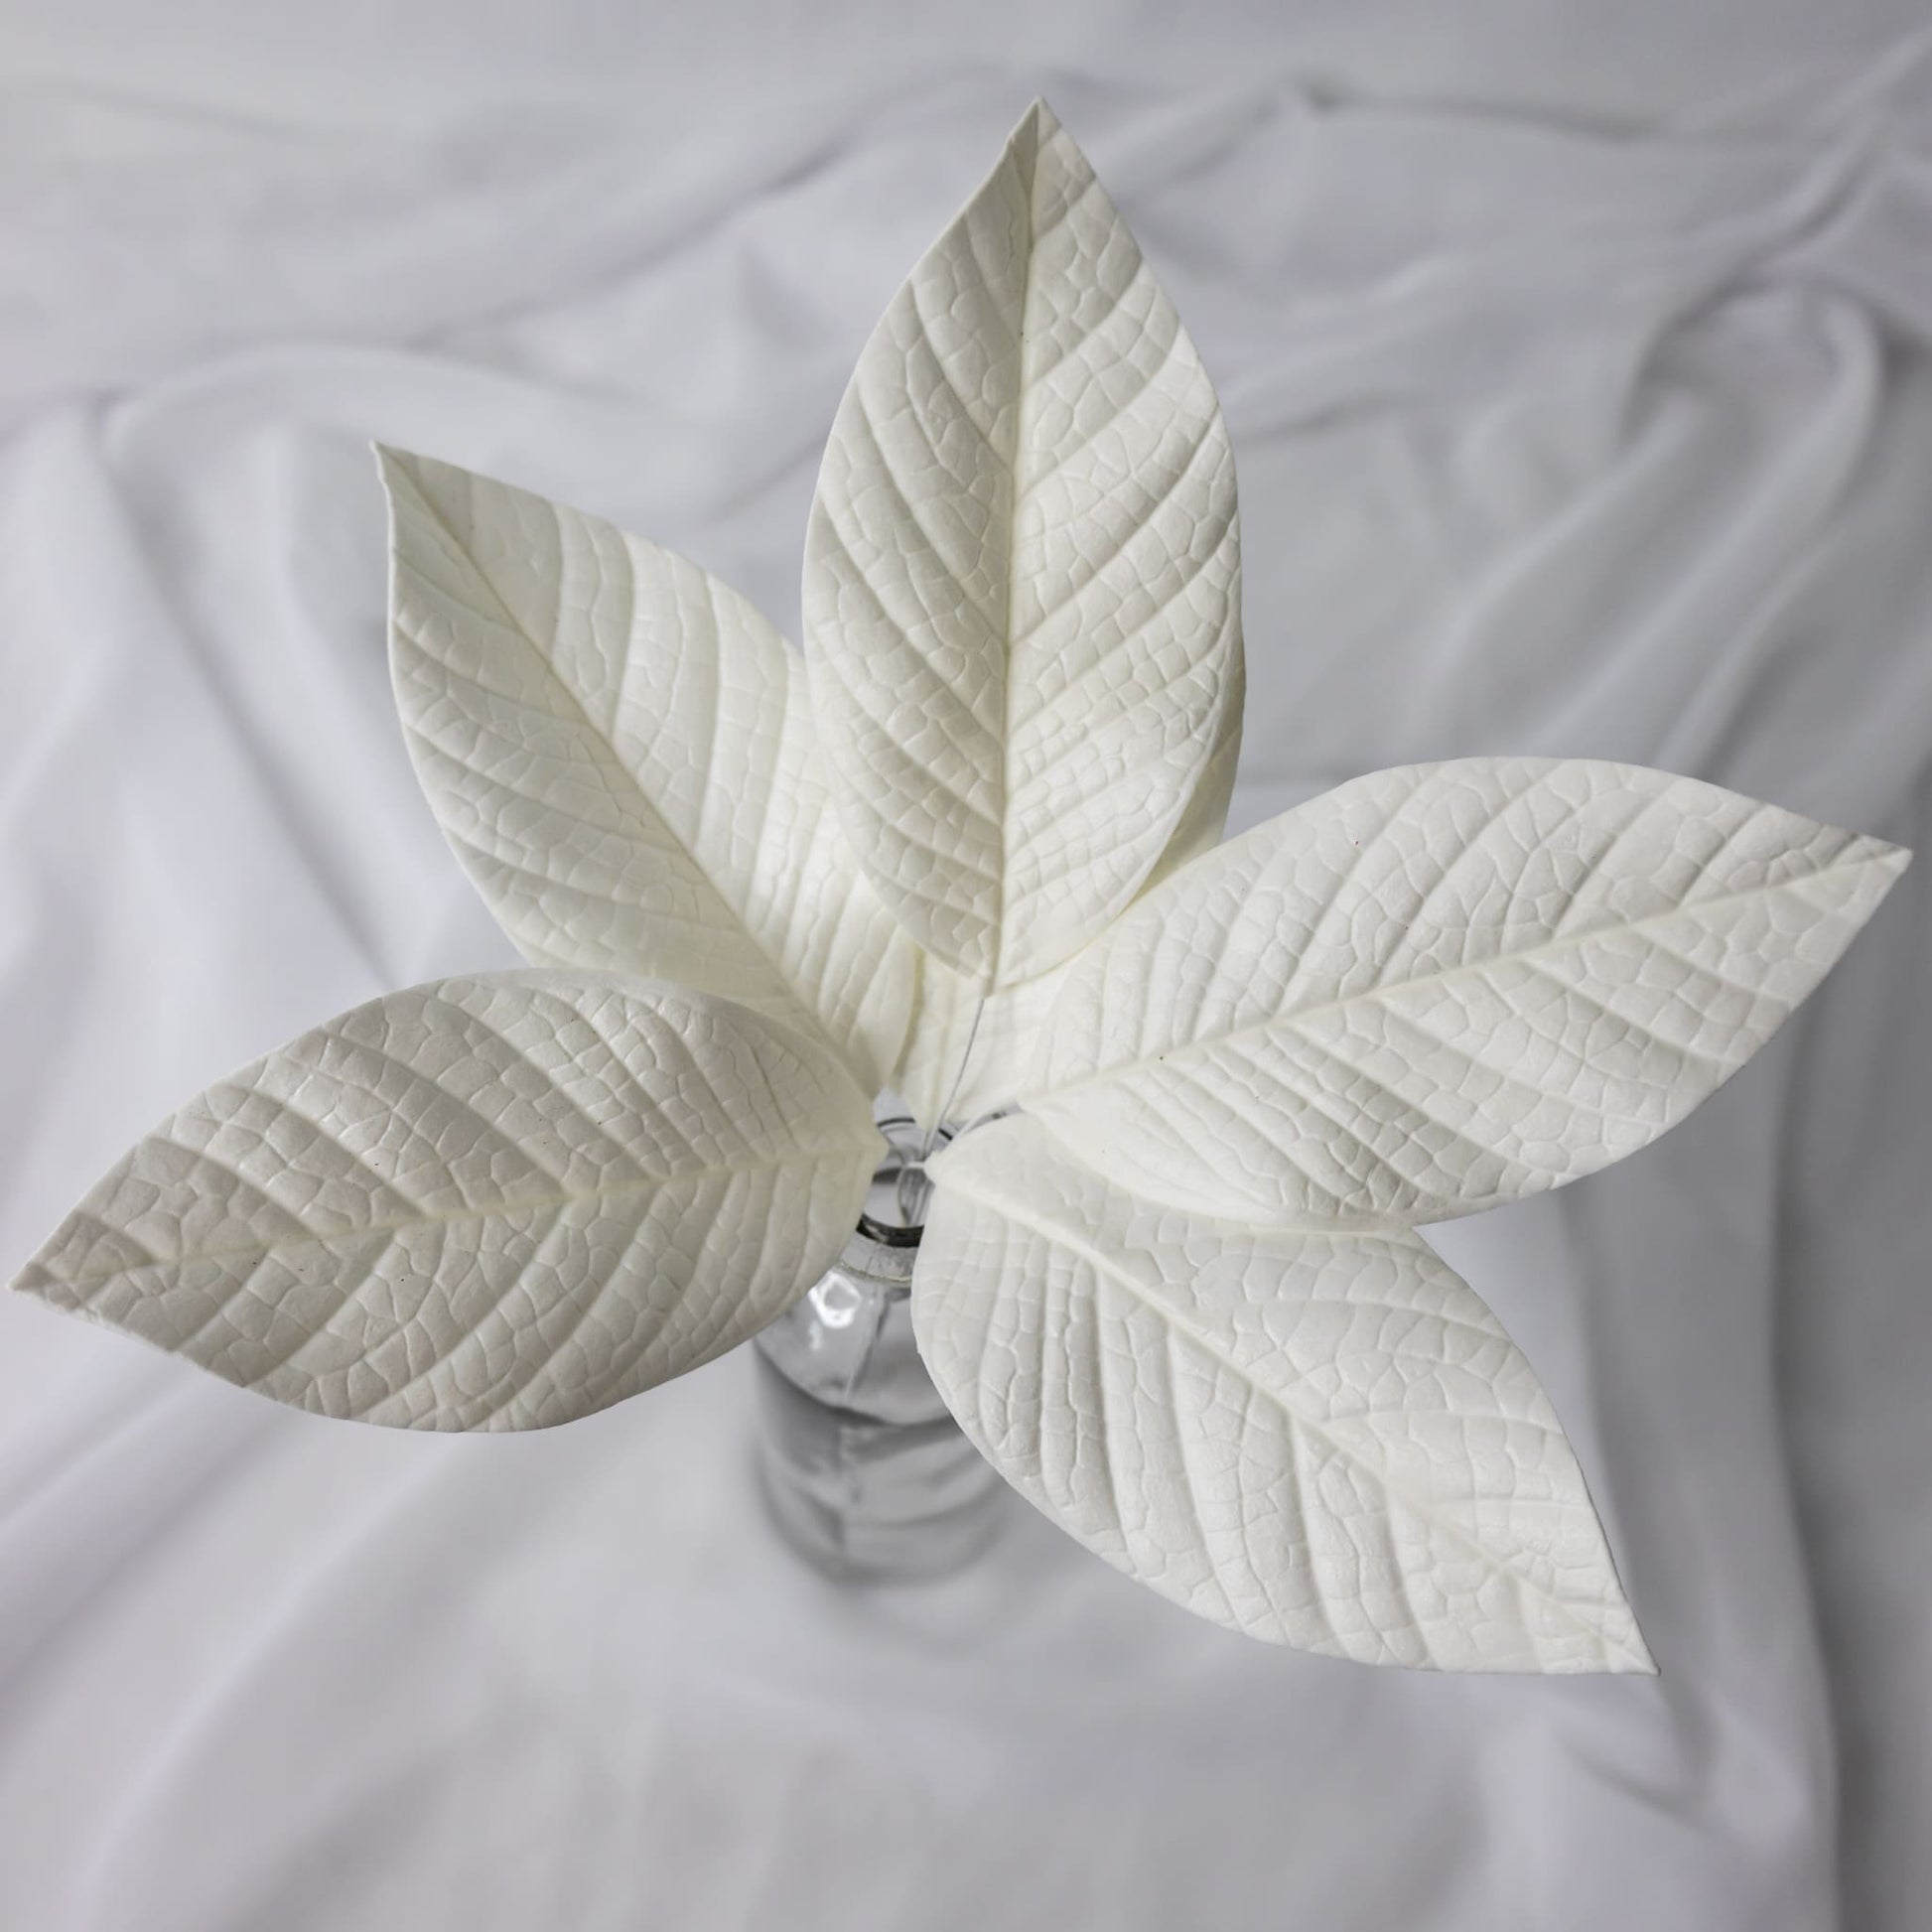 artificial white gardenia leaves placed in transparent glass vase top view